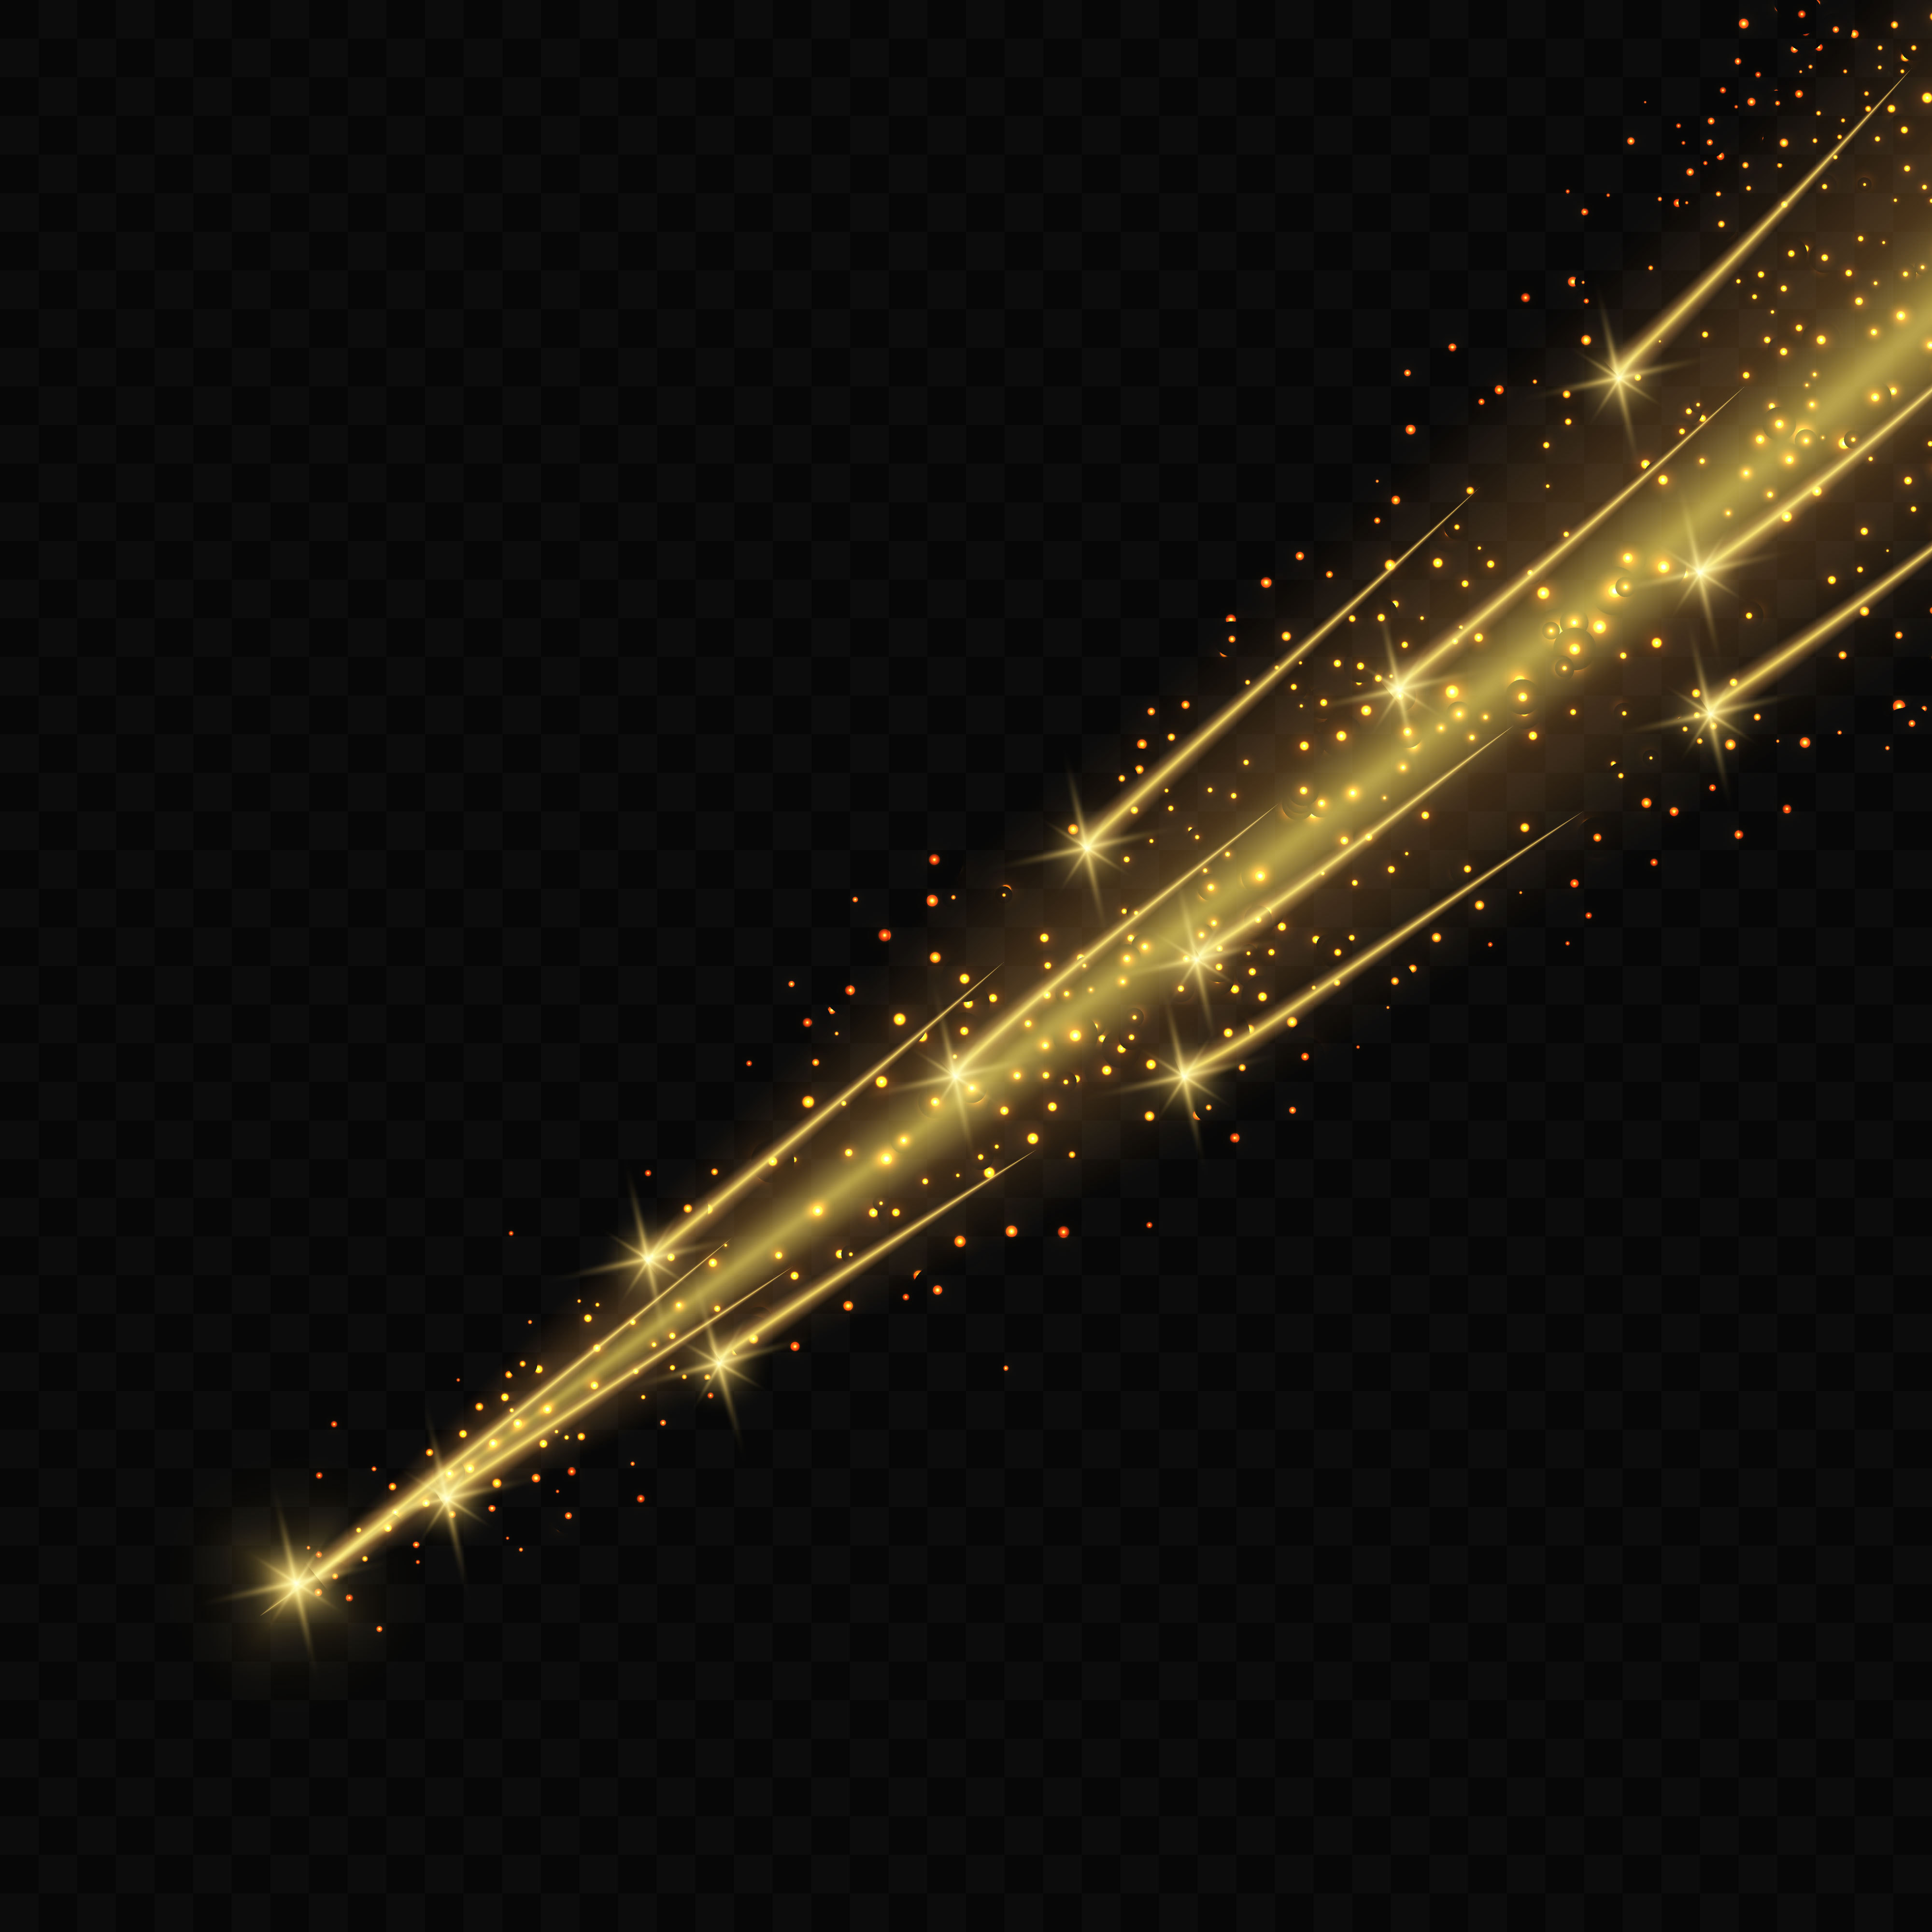 Meteor or comet on transparent background. Gold light effect. Meteor or comet on transparent background. Template for your design